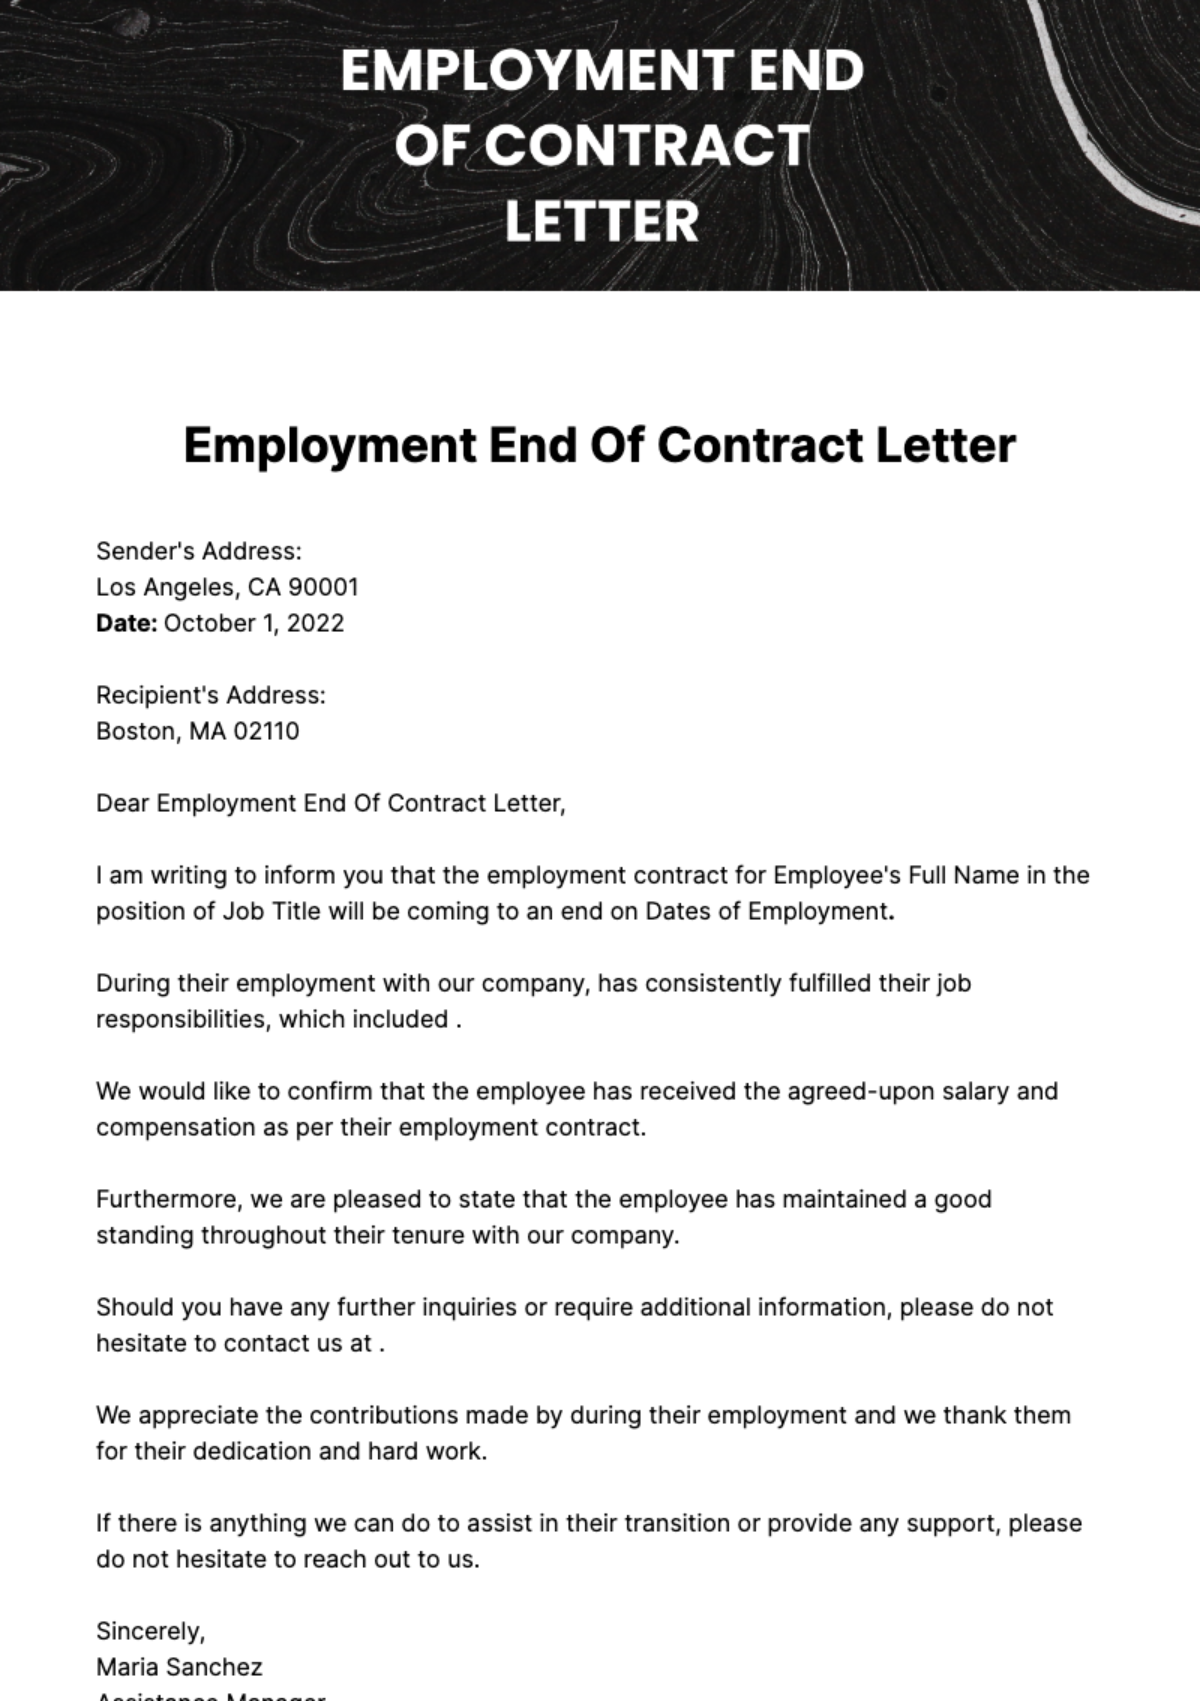 Employment End Of Contract Letter Template